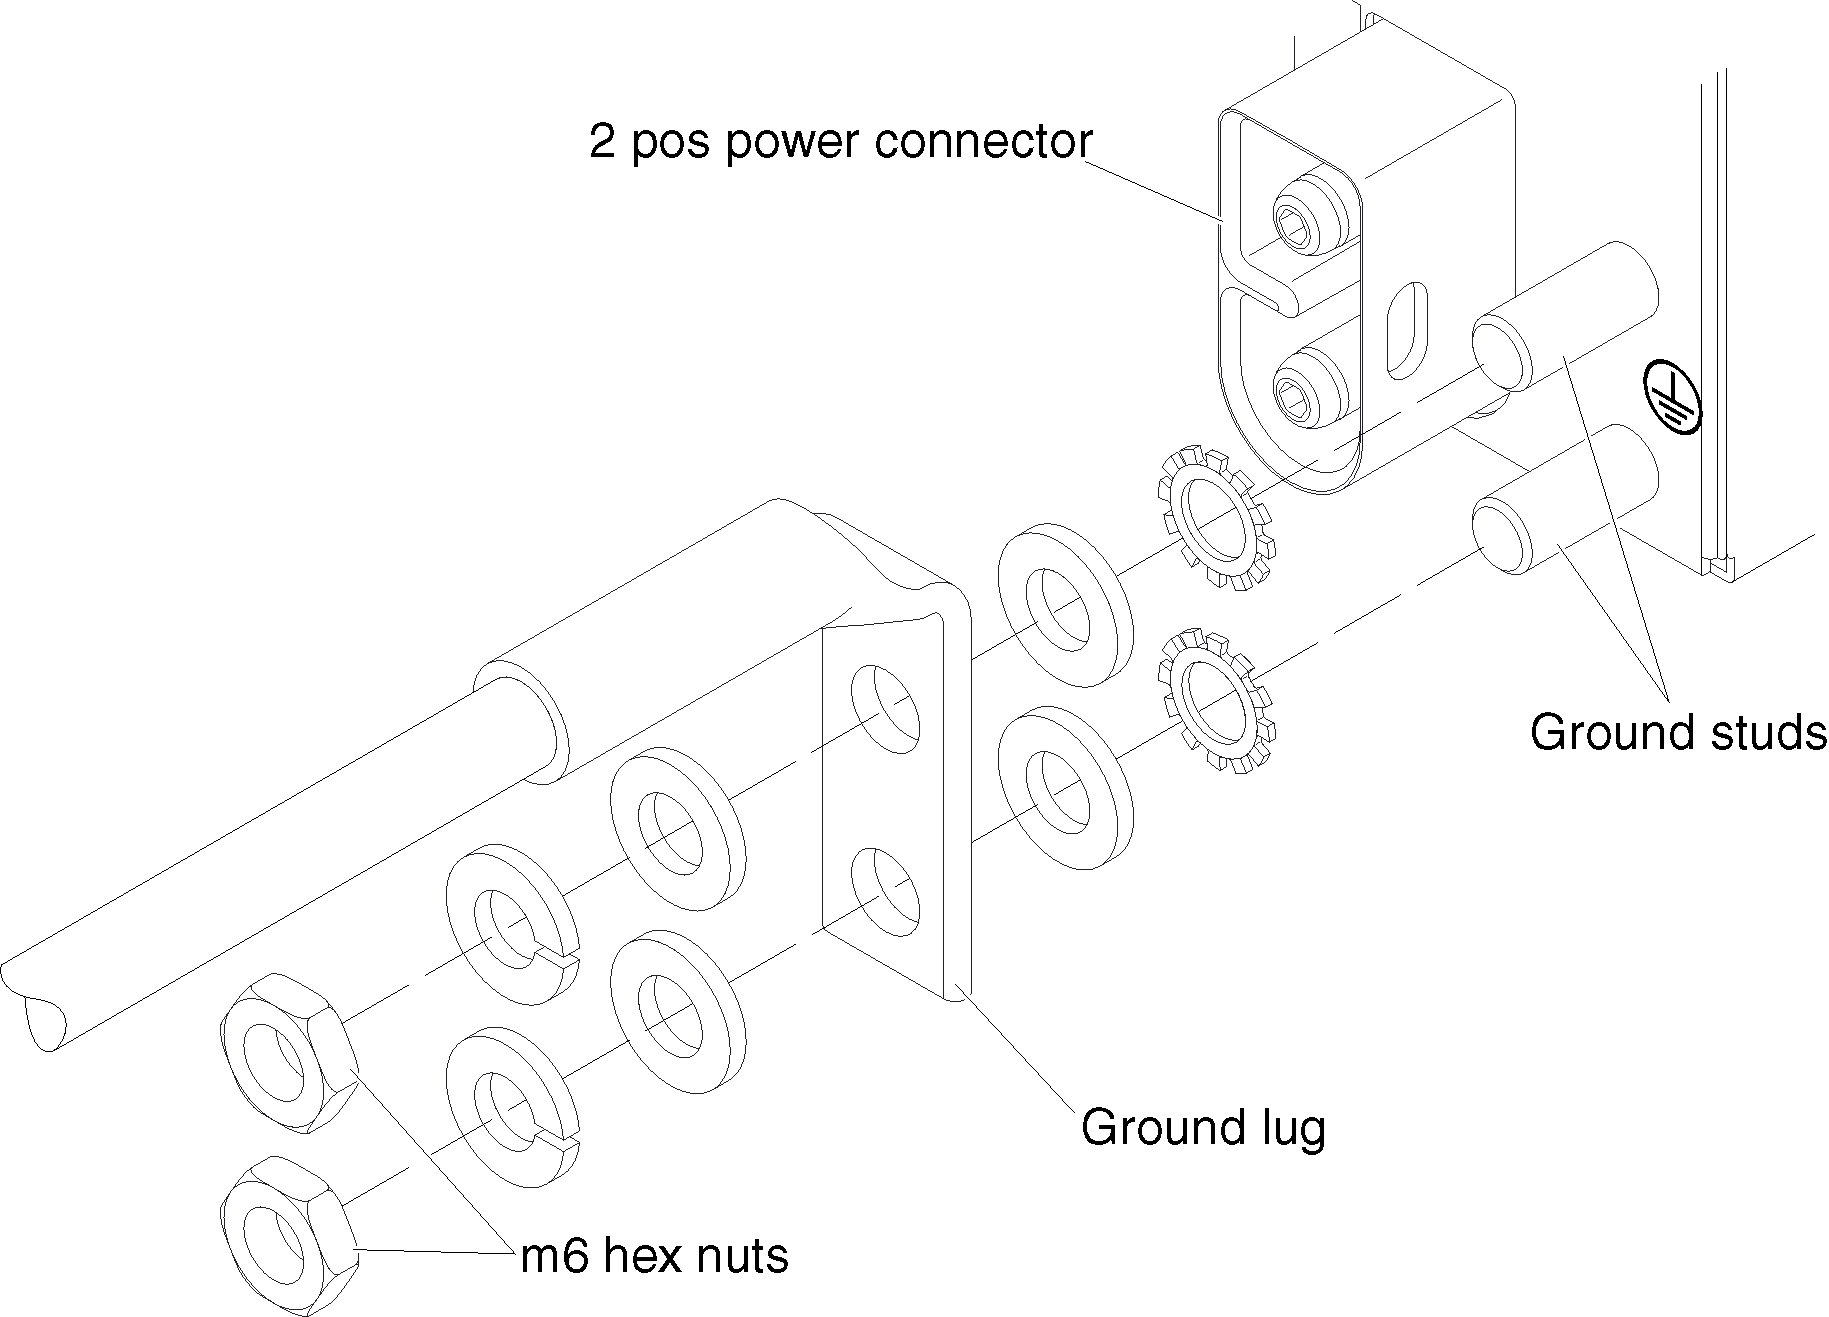 Illustration showing how to remove the ground cable